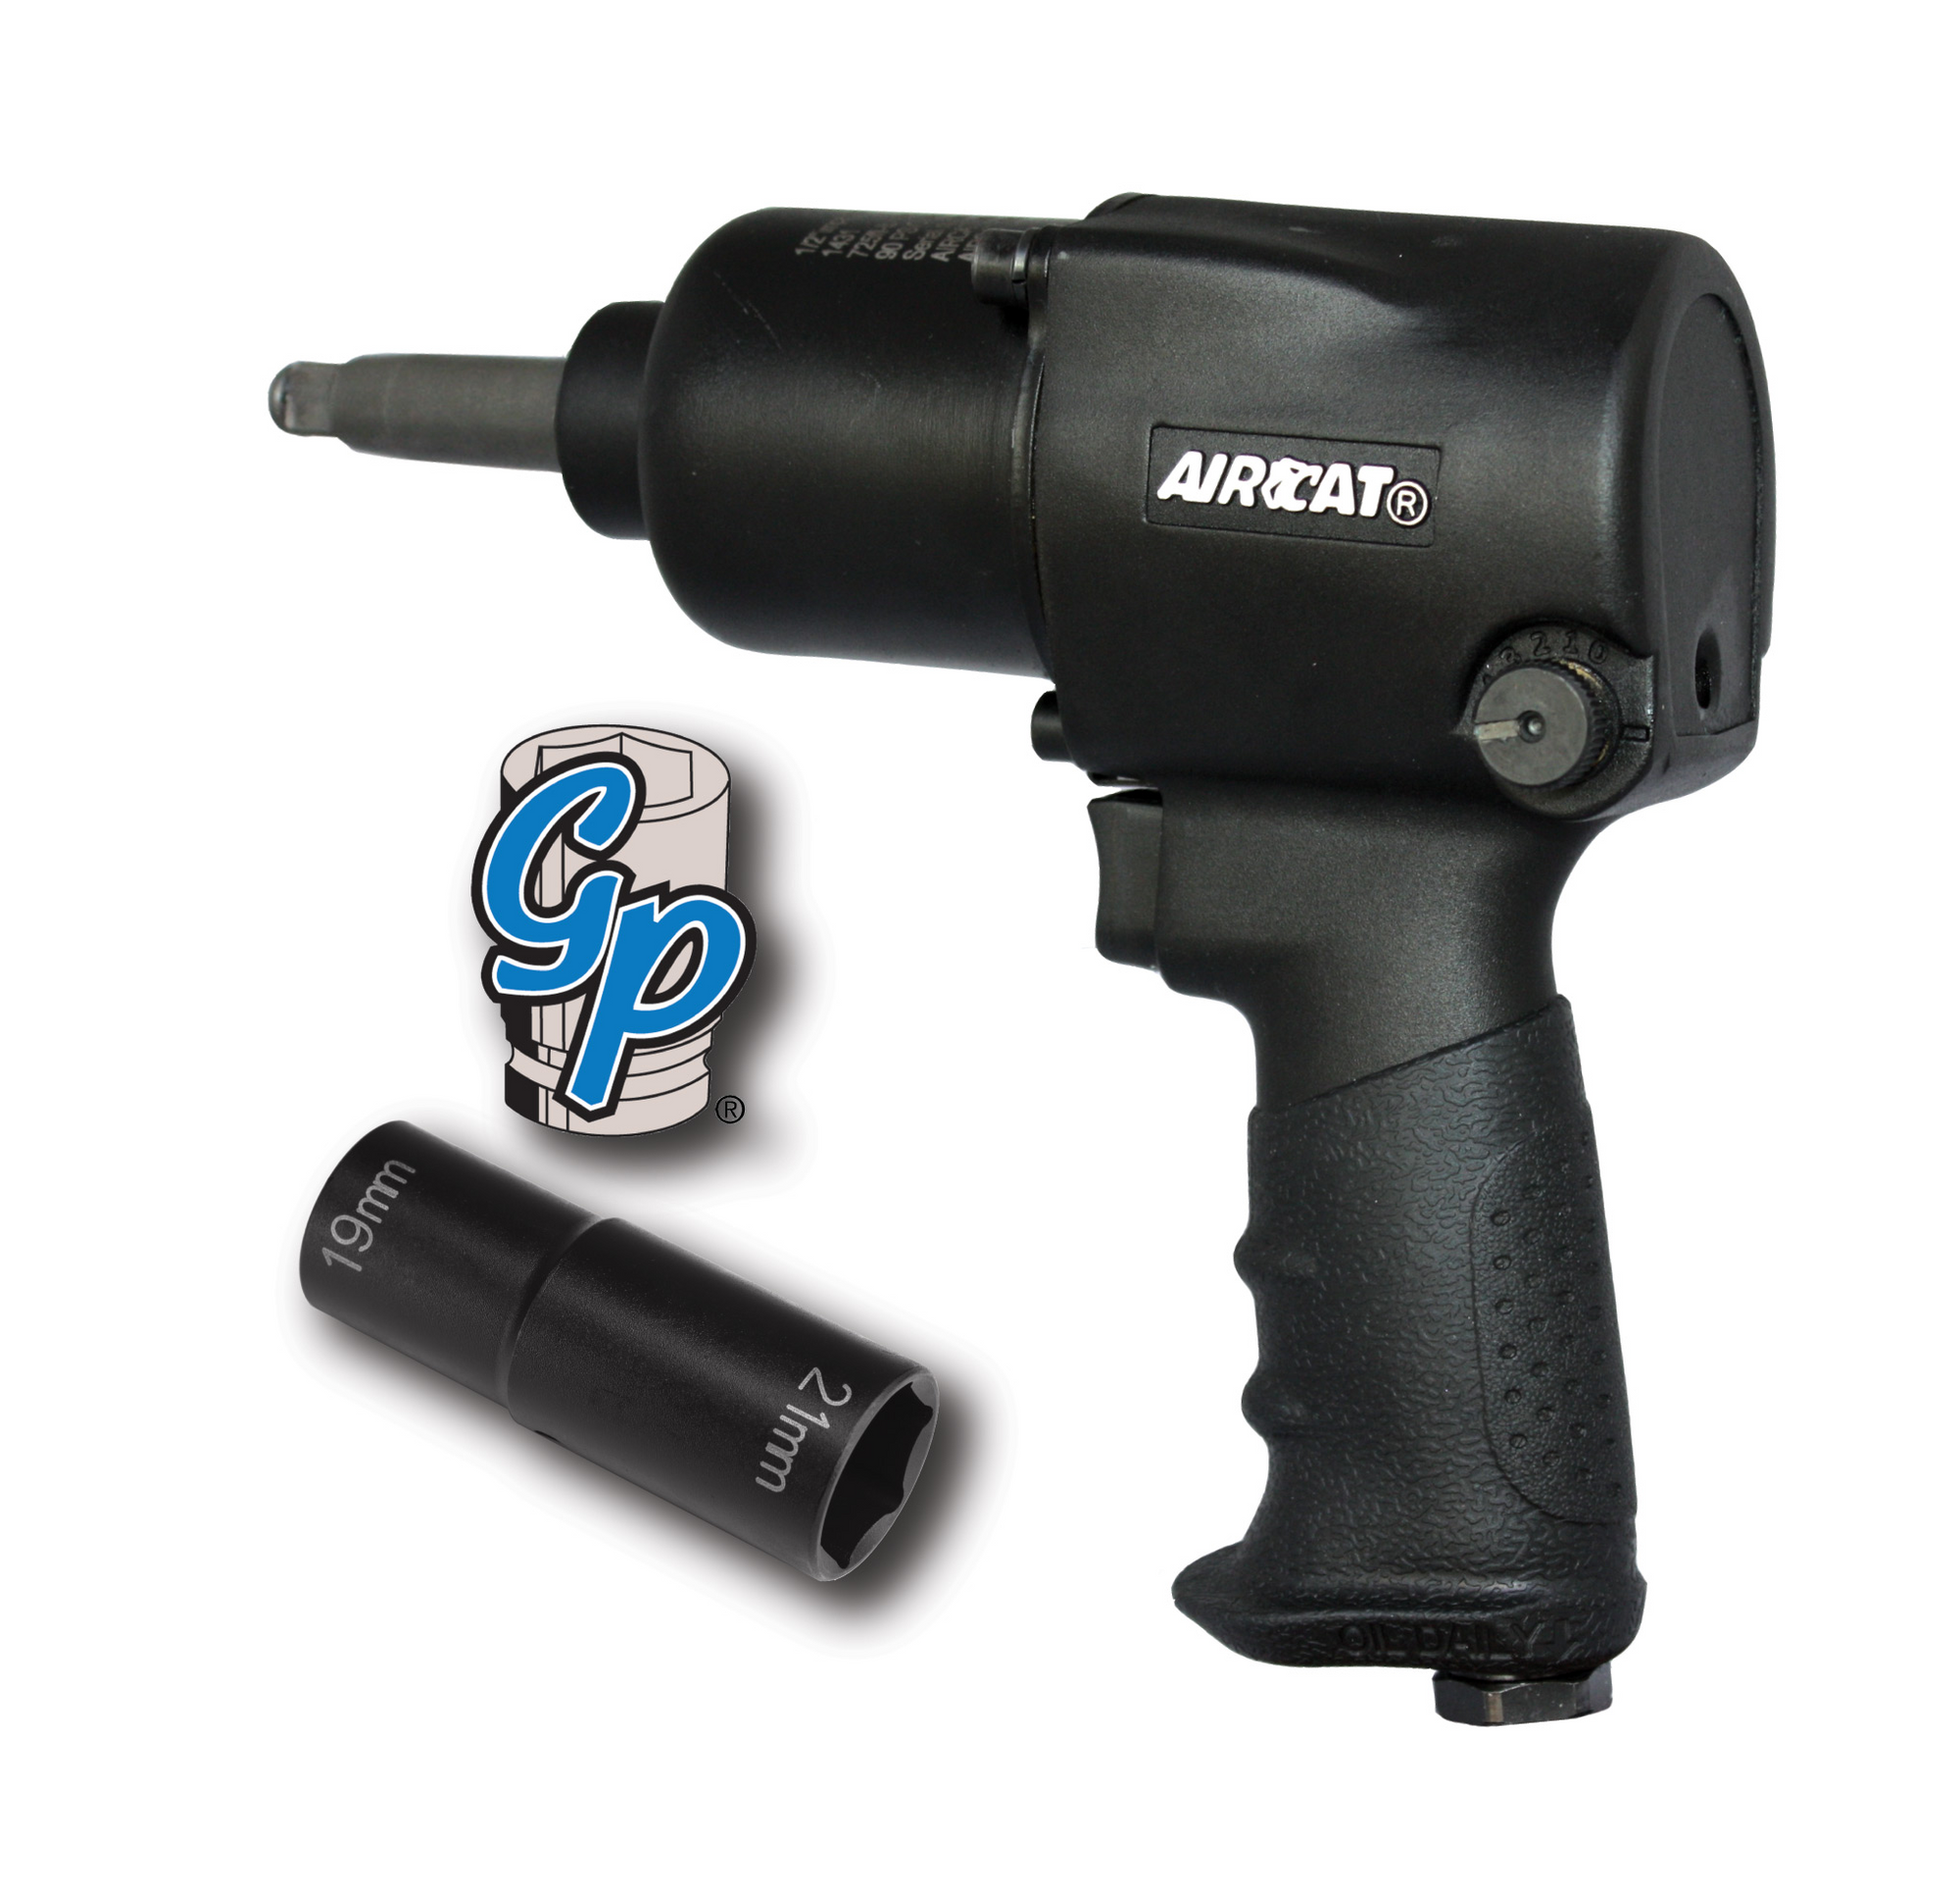 AIRCAT 1/2" Impact Wrench with 2" Extended Anvil - Direct Tool Source